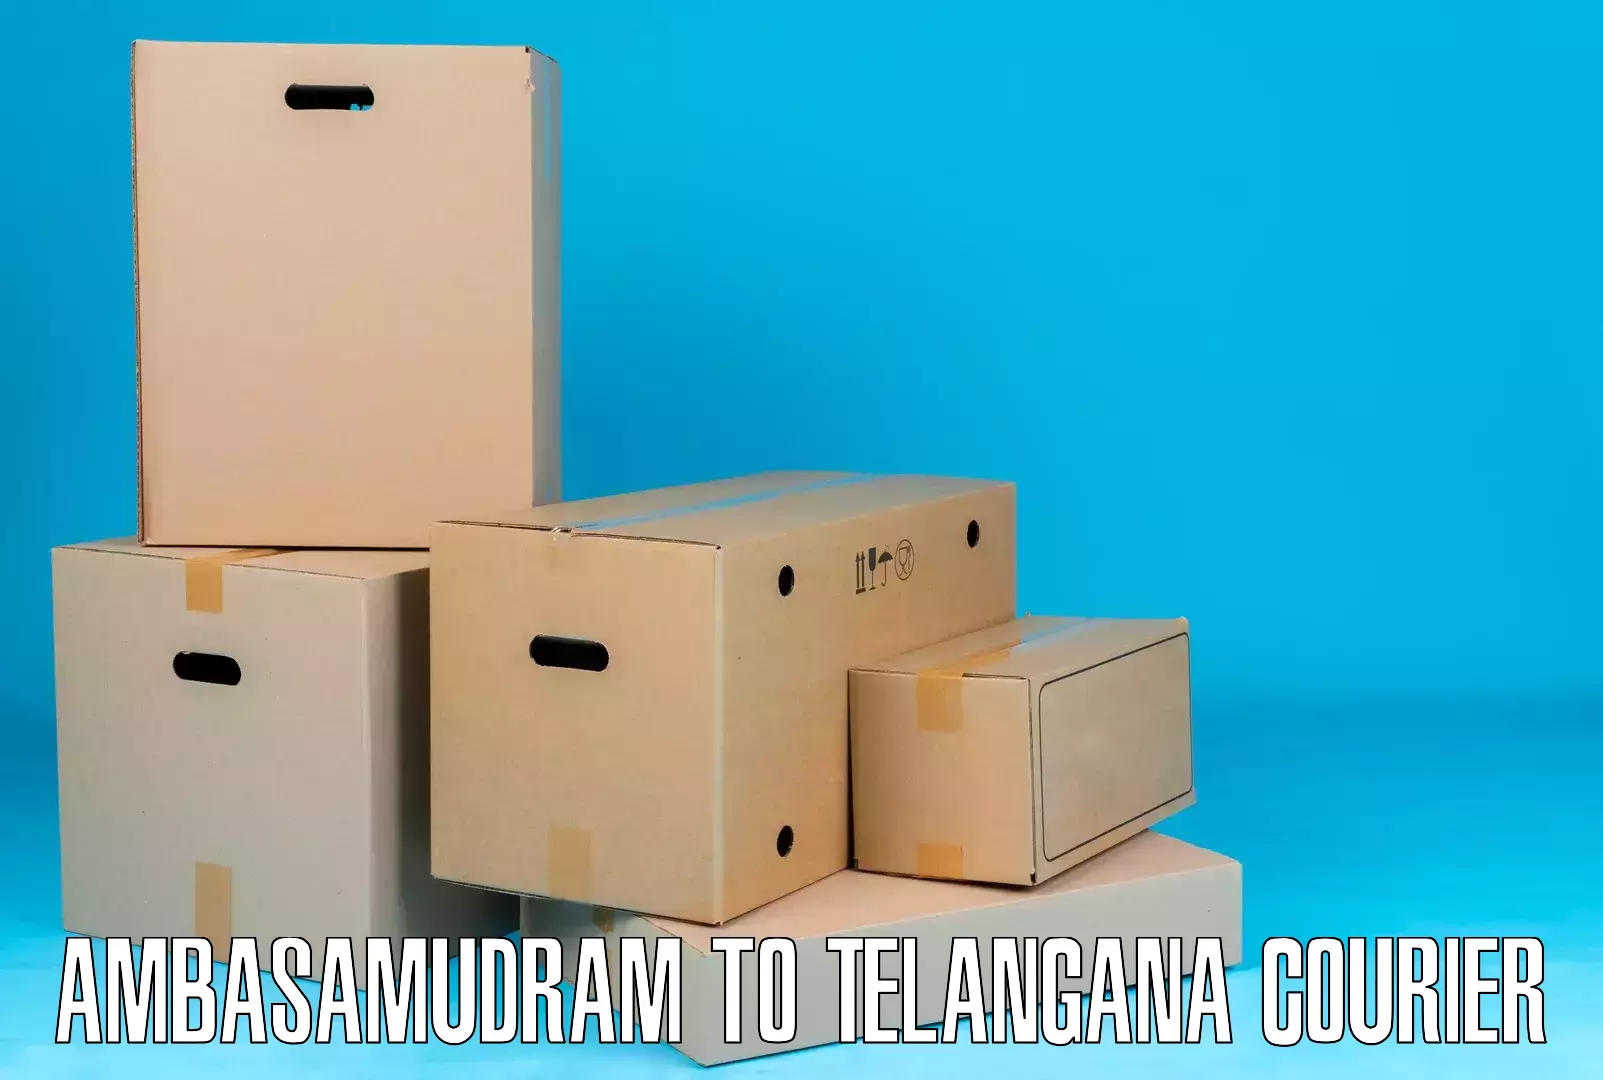 User-friendly delivery service in Ambasamudram to Telangana